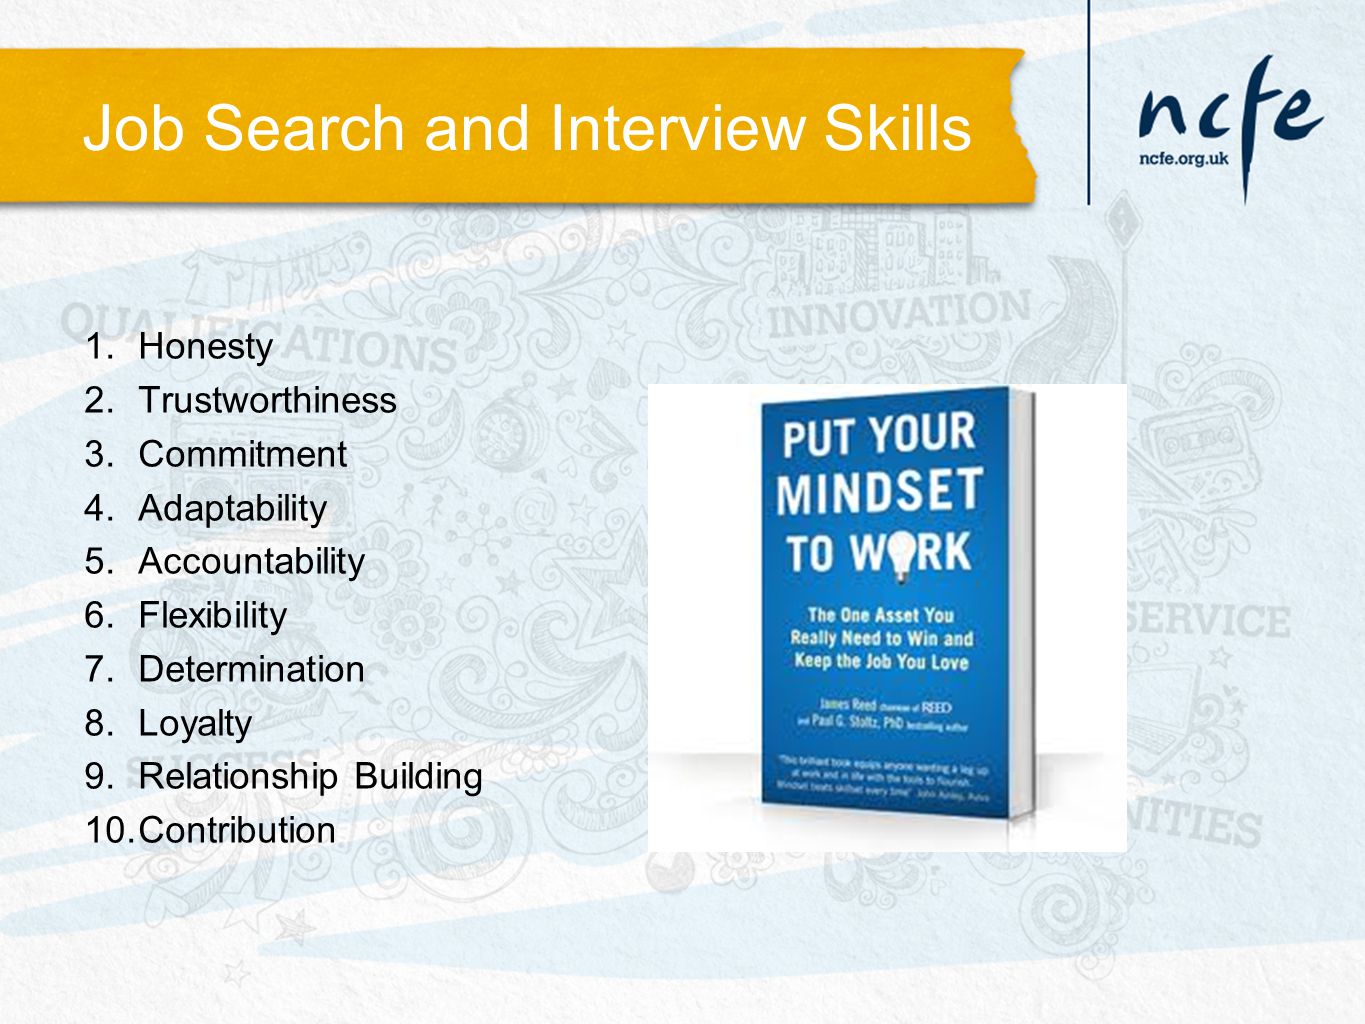 Job Search and Interview Skills 1.Honesty 2.Trustworthiness 3.Commitment 4.Adaptability 5.Accountability 6.Flexibility 7.Determination 8.Loyalty 9.Relationship Building 10.Contribution